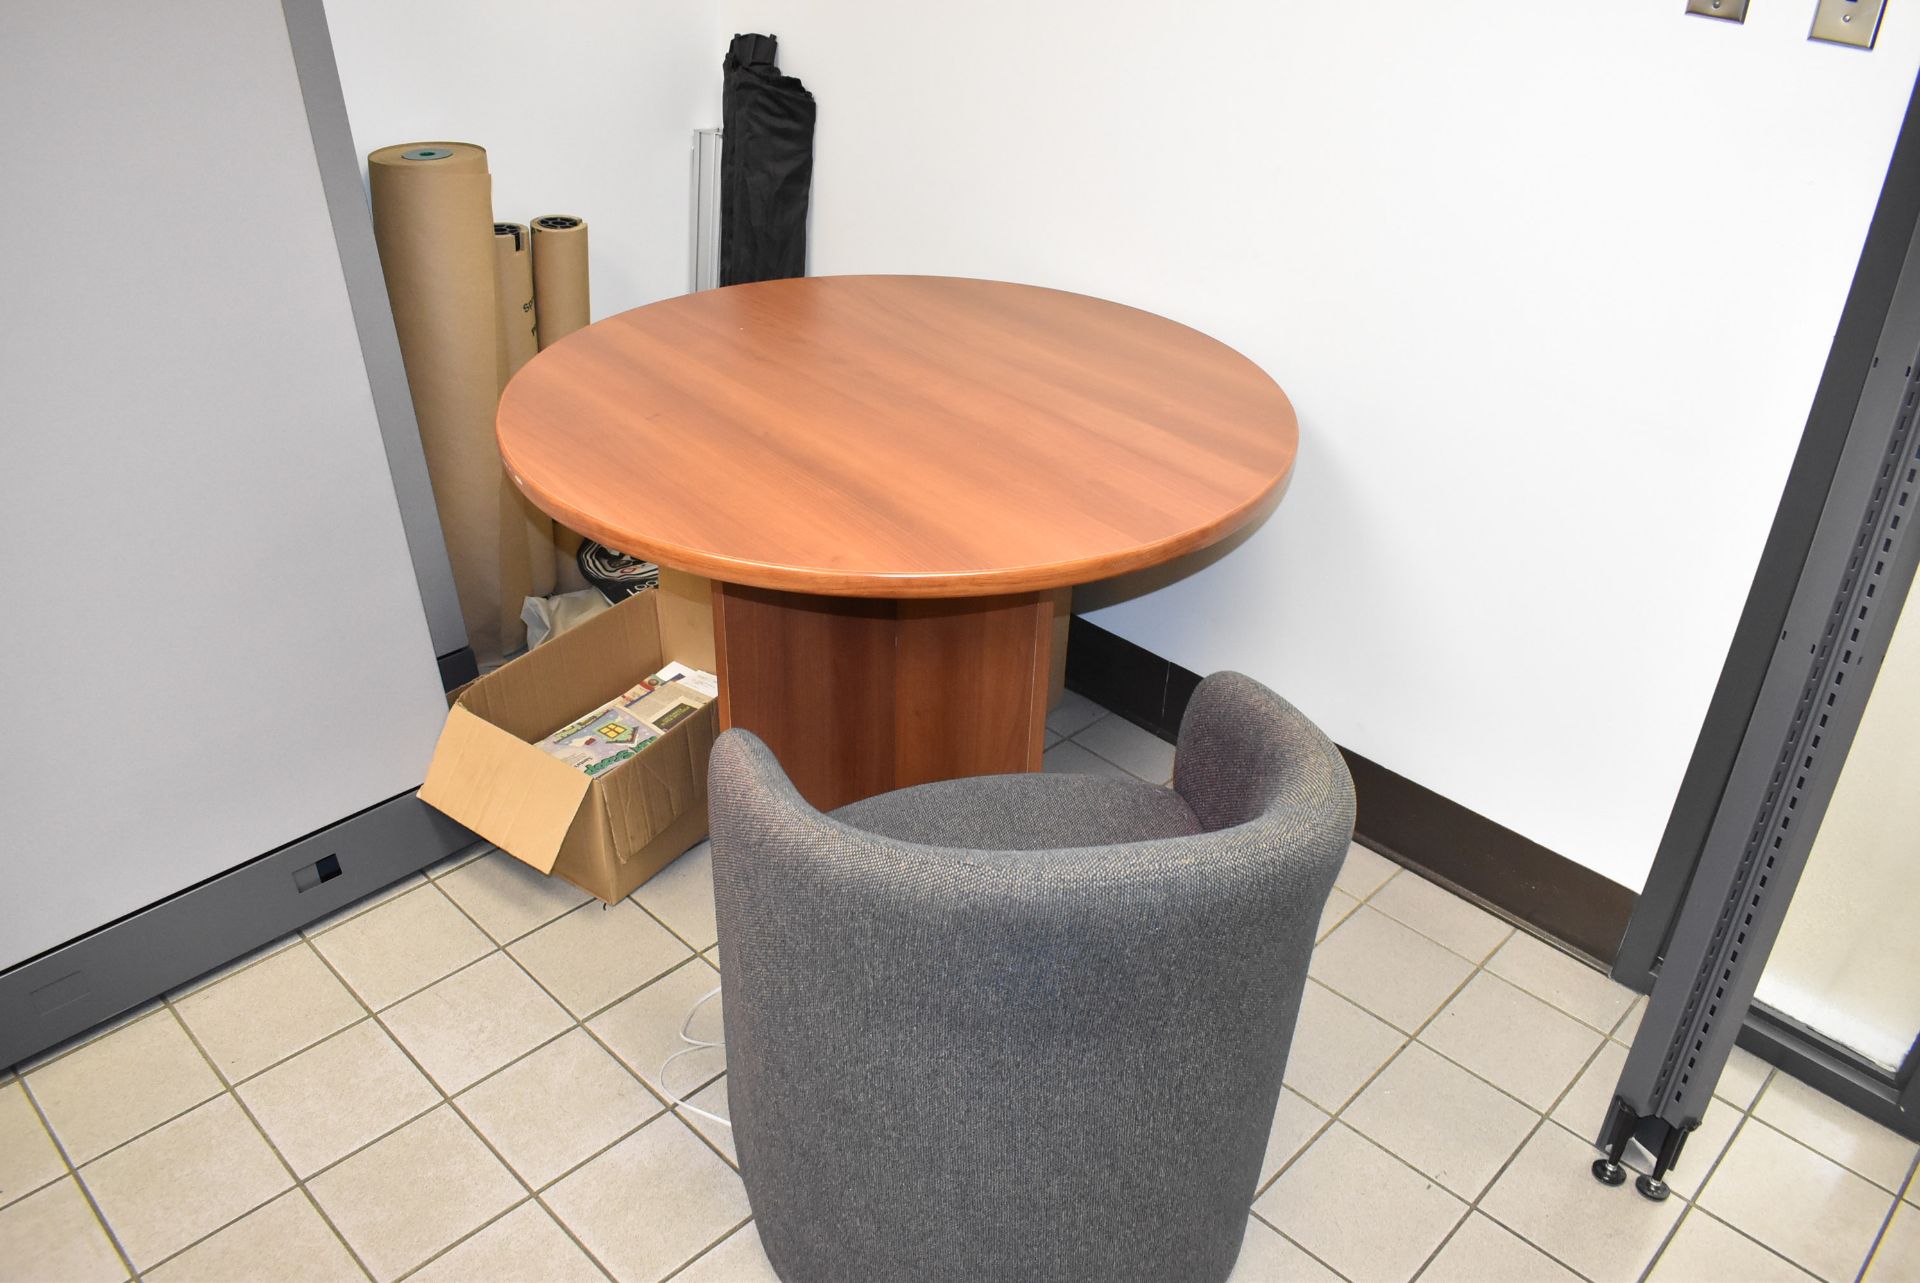 LOT/ CONTENTS OF OFFICE CONSISTING OF DESK WITH OFFICE CHAIR, COUCH, ROUND TABLE WITH CHAIR, STORAGE - Image 3 of 5